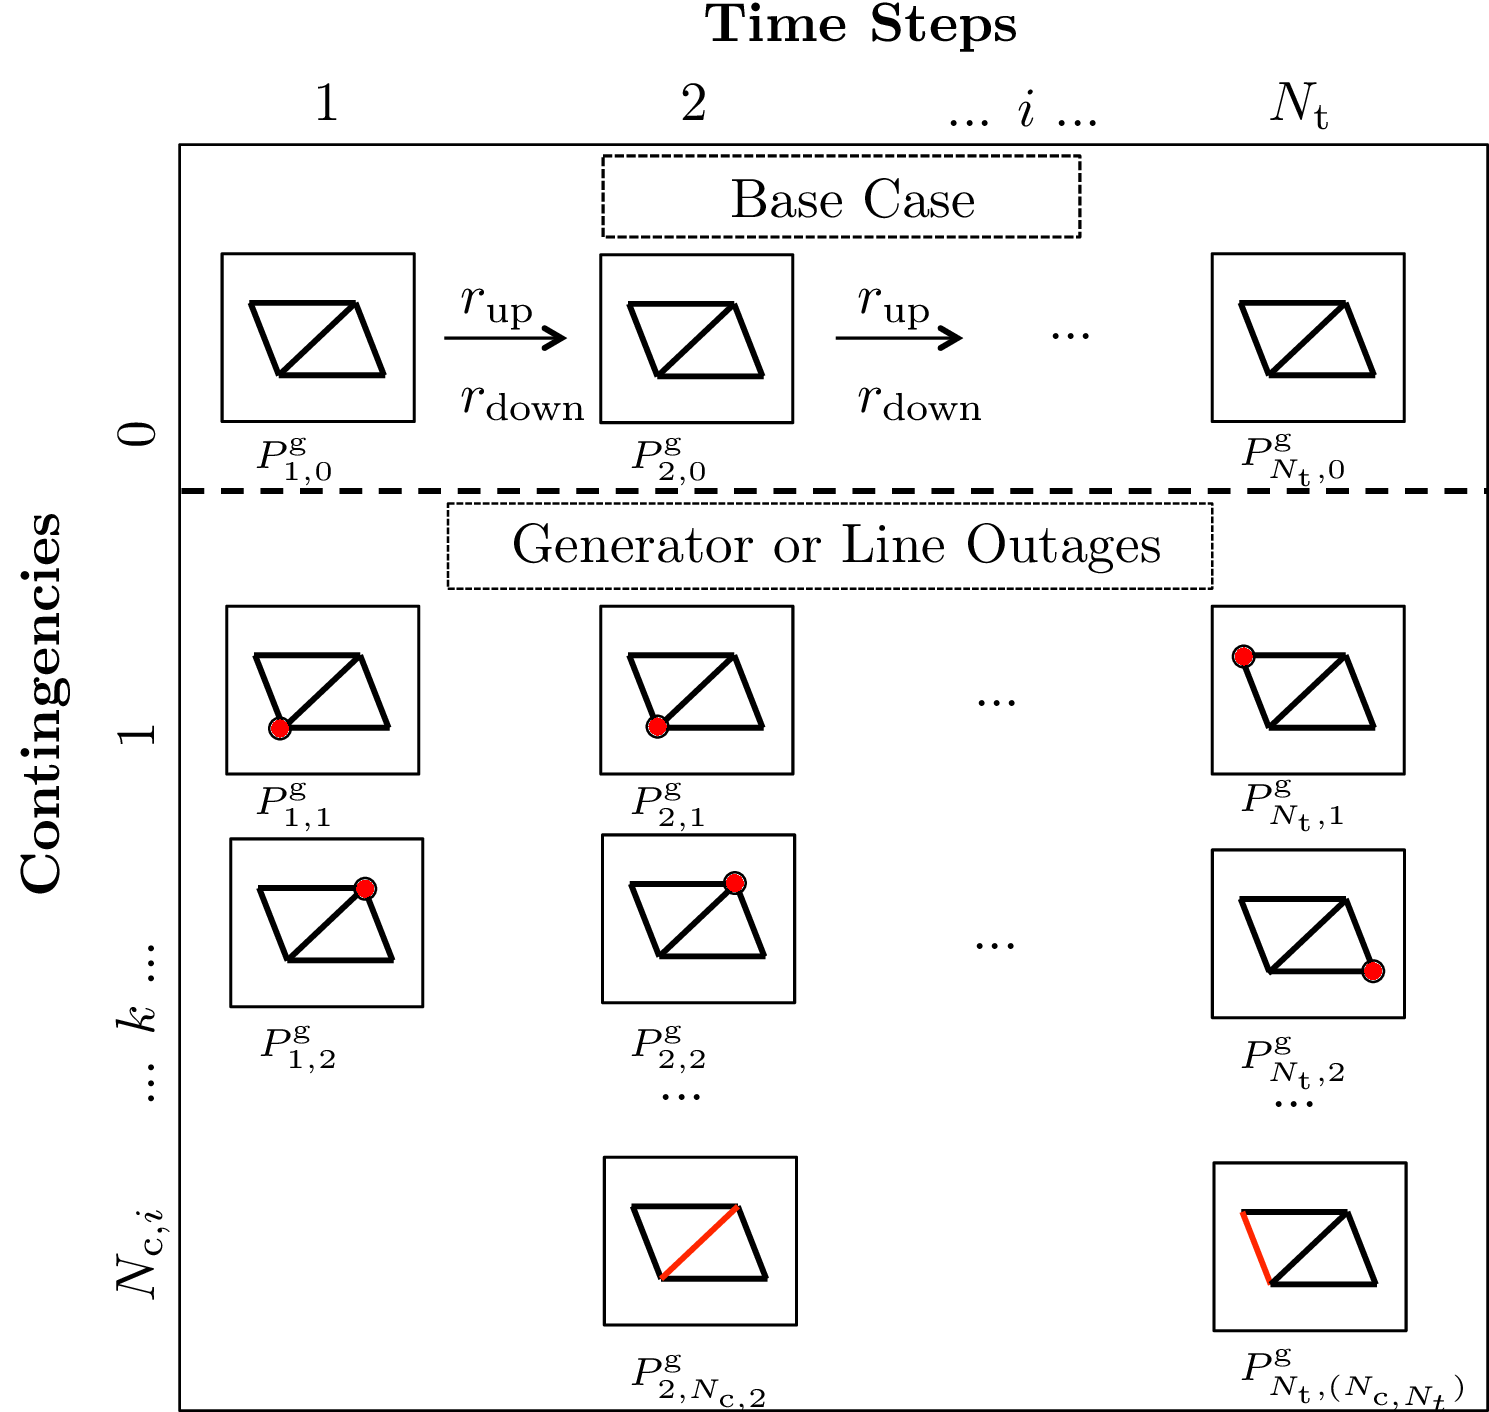 Figure: Illustration of the SCOPF (Security-Constrained OPF) over multiple time steps: Each time step (columns) and contingency (rows with red highlighting) uses a full network model. The models can be coupled by rate constraints (horizontal arrows).